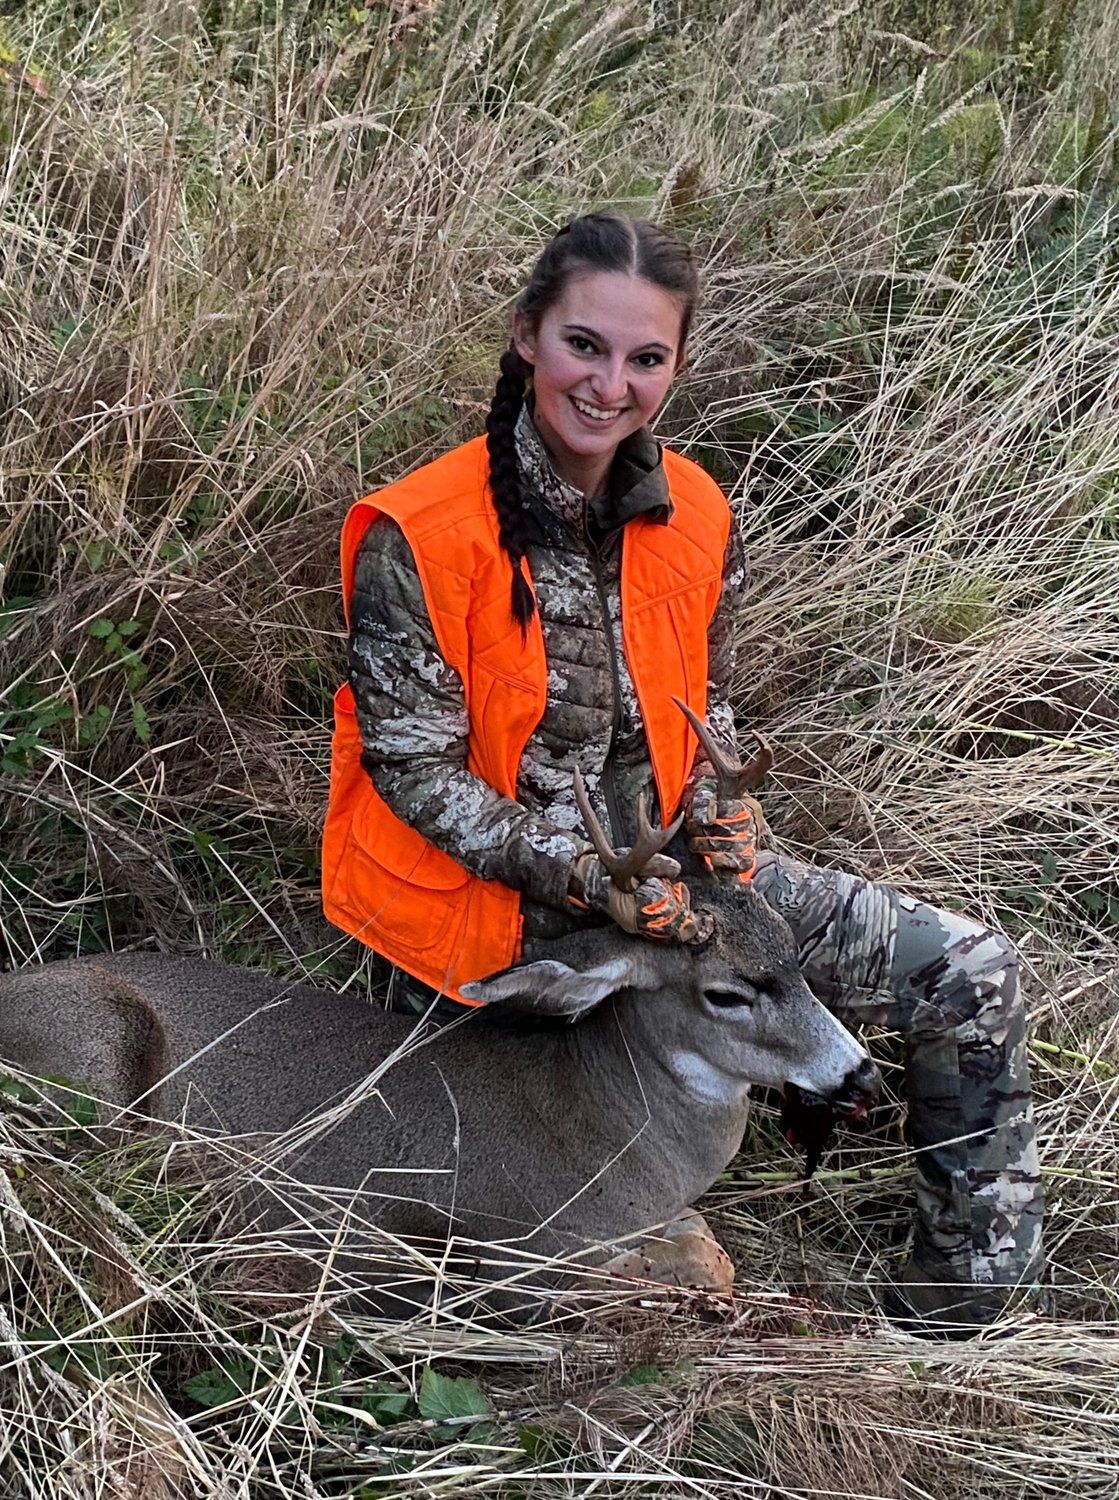 Jess Dzinbal harvested this deer around the Lincoln Creek area on Oct. 16.